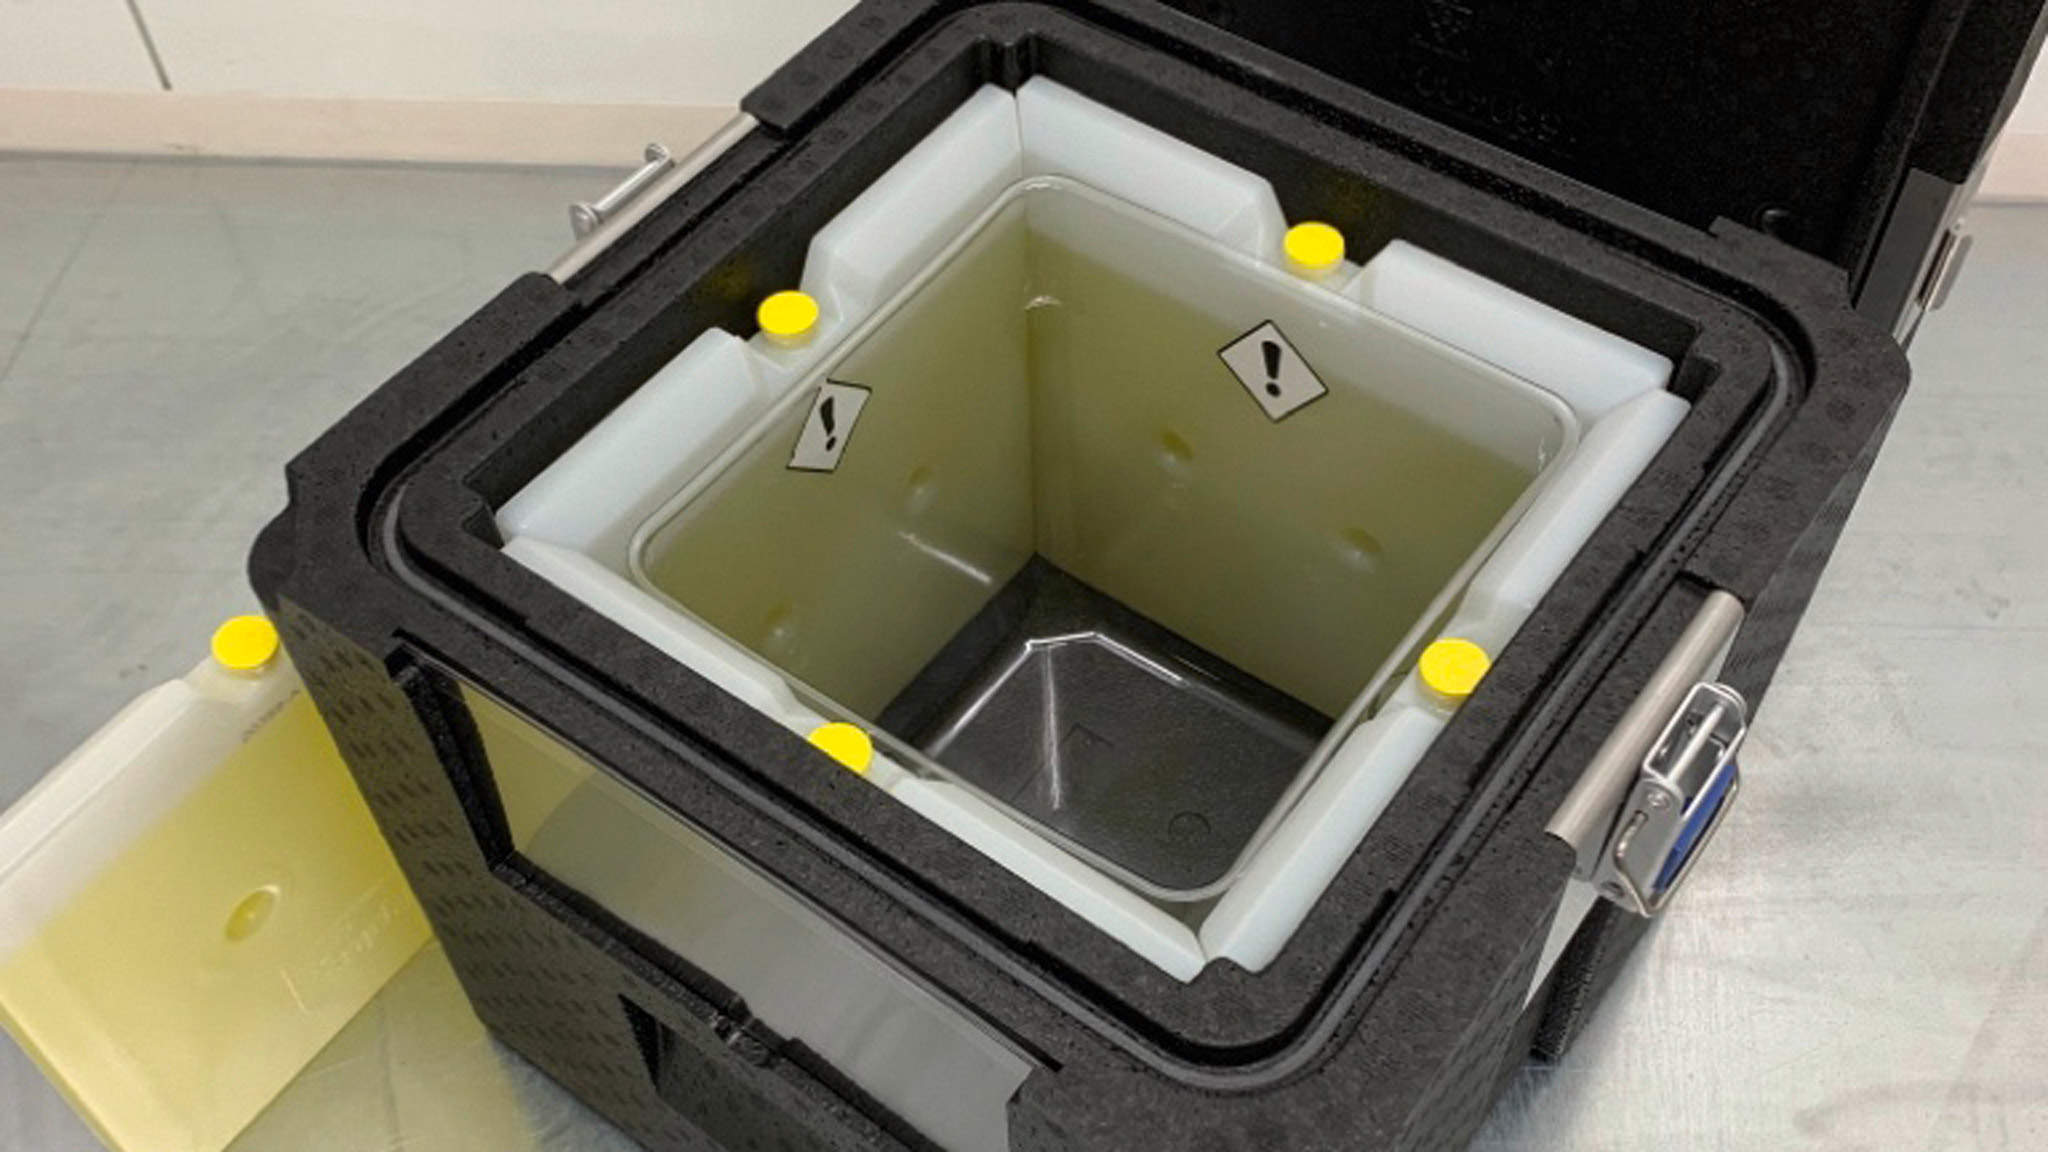 Coolling boxes for vaccine transportation